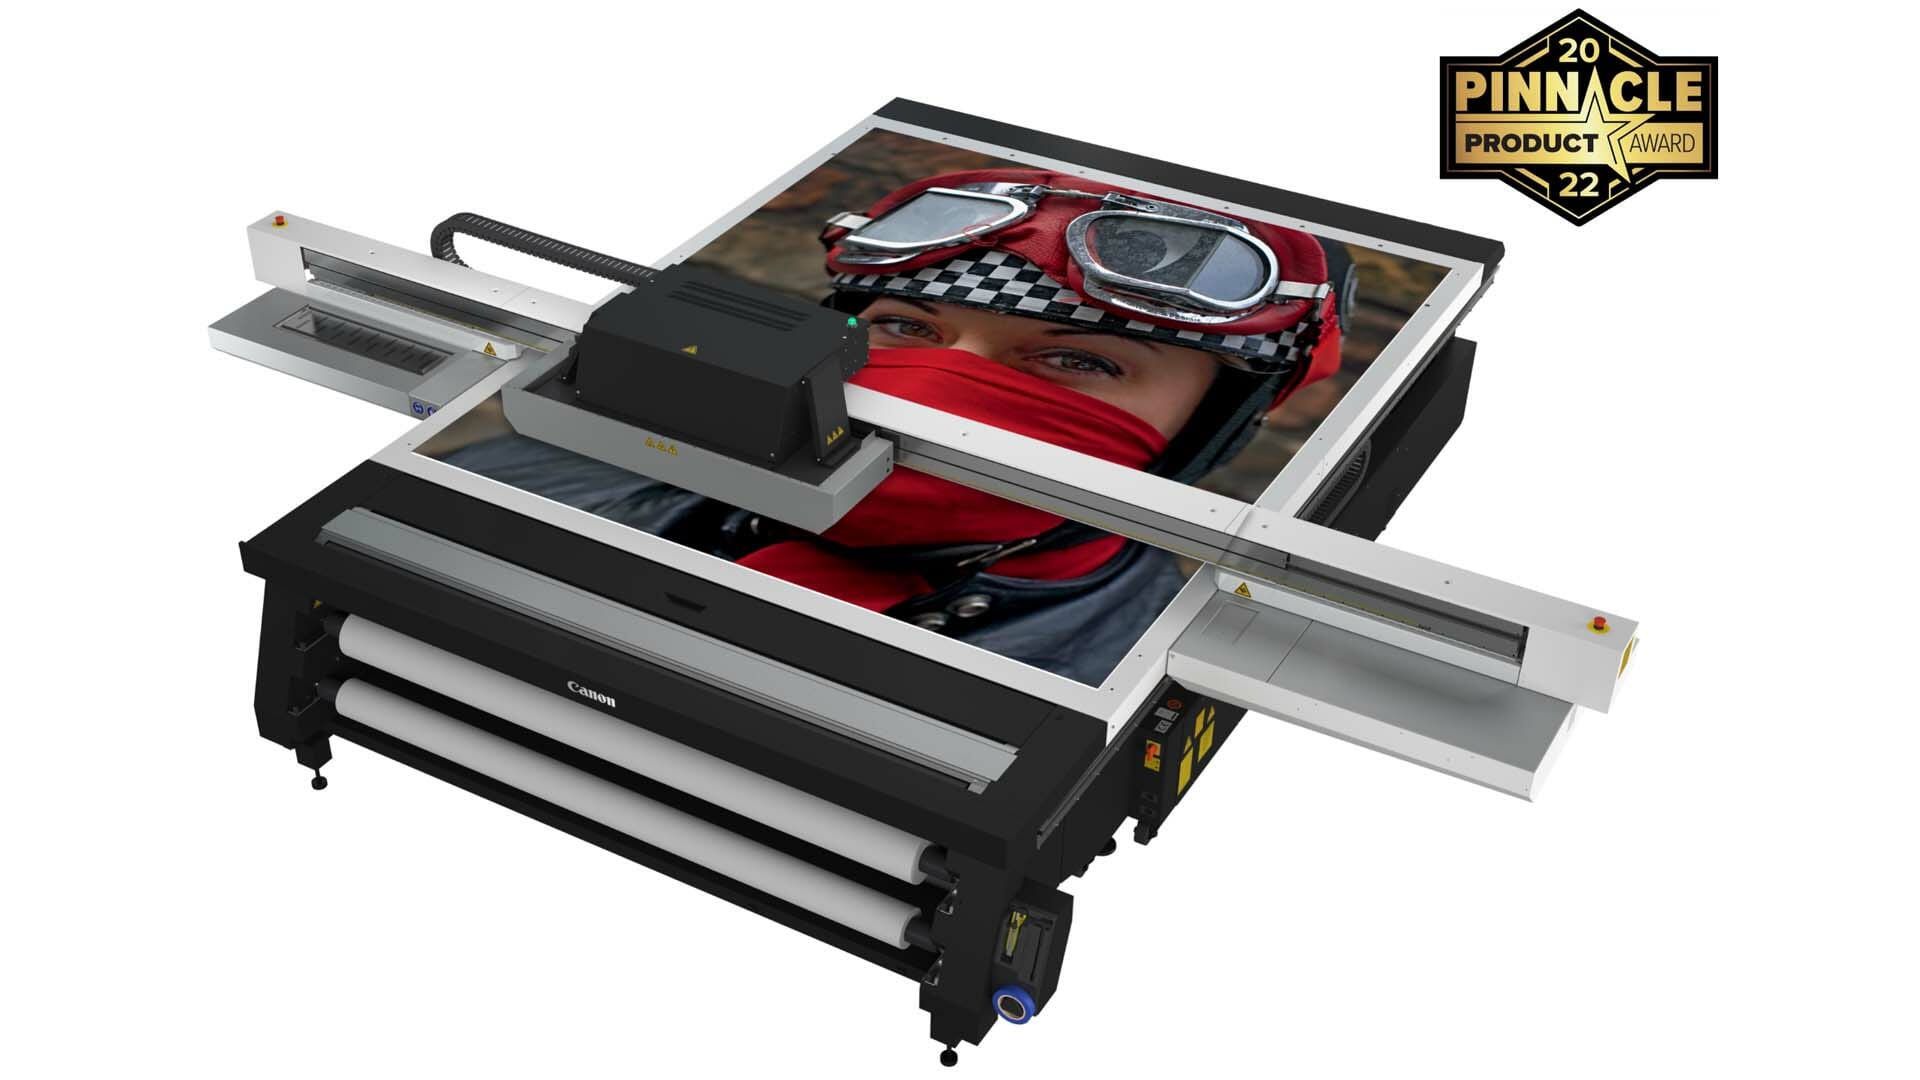 Canon large format graphics products and technology win four Pinnacle Awards